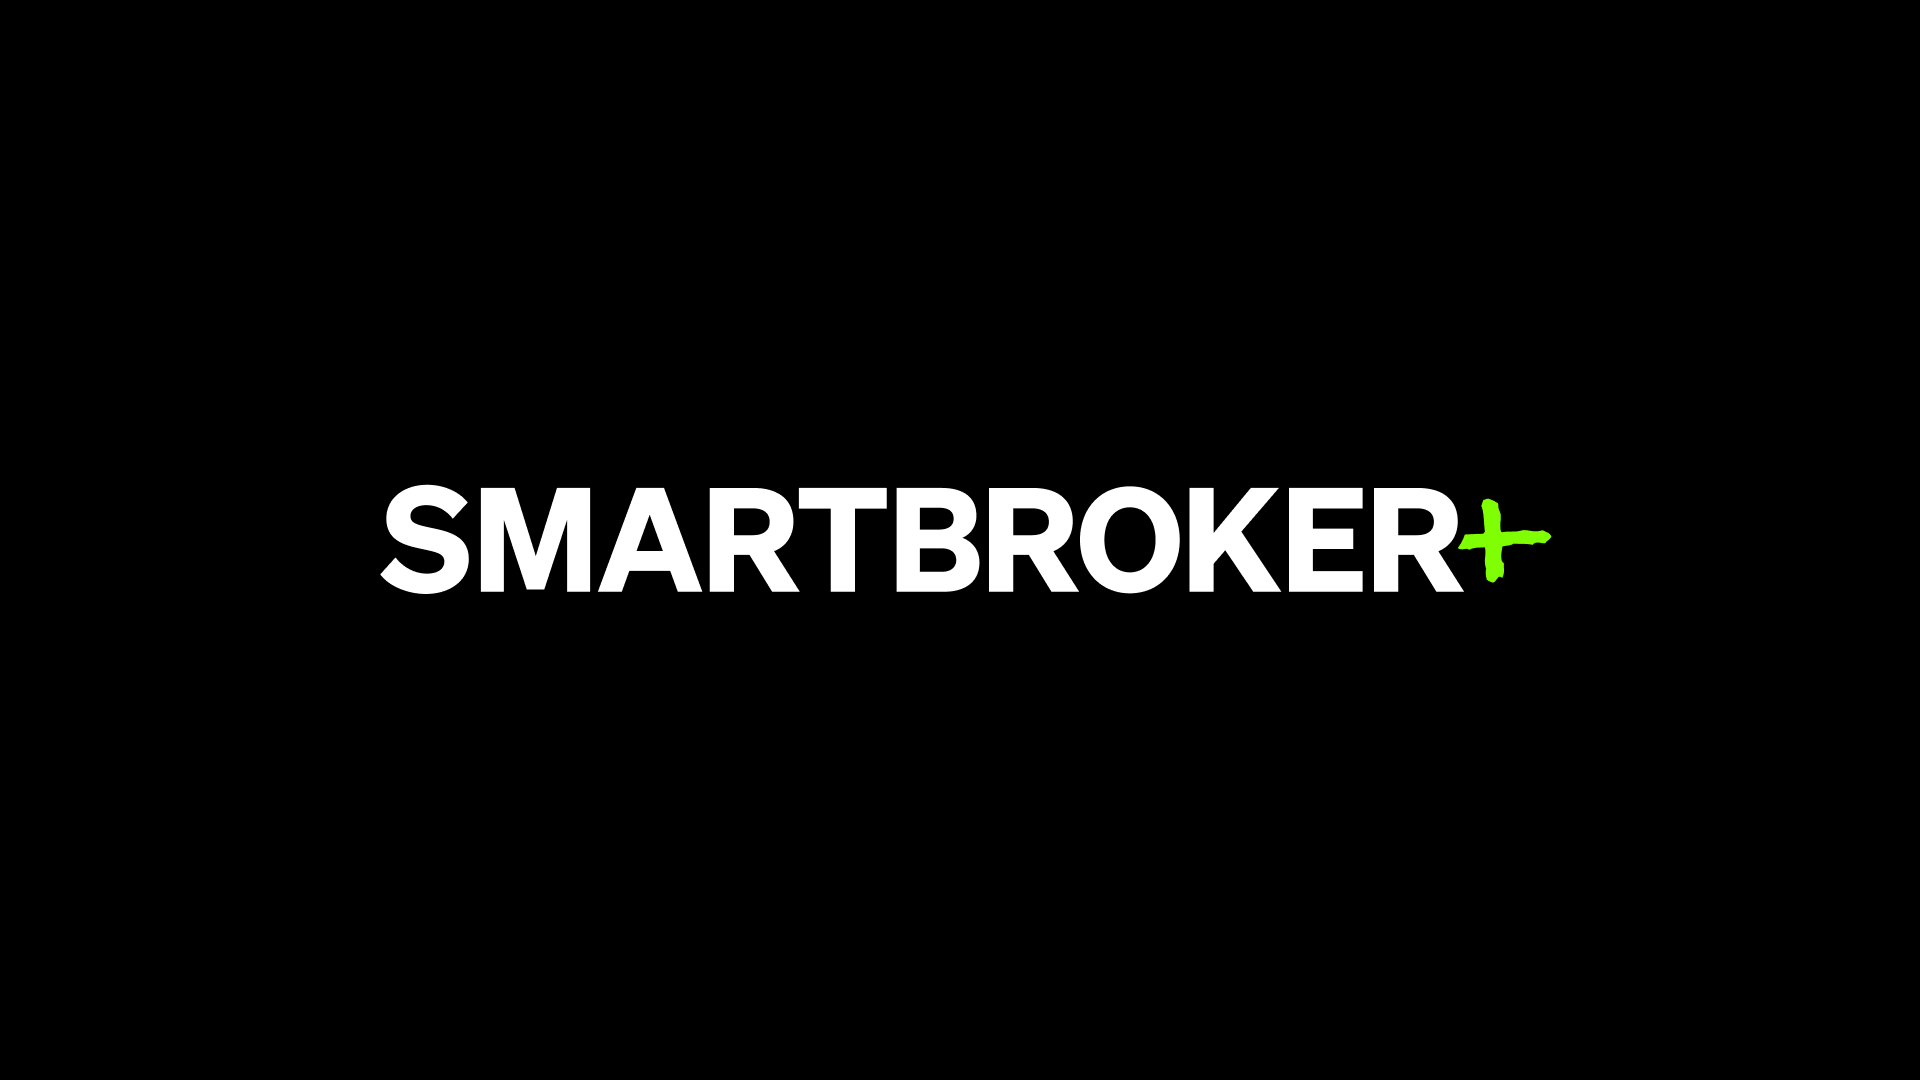 SMARTBROKER+ Time for a New Trading Experience